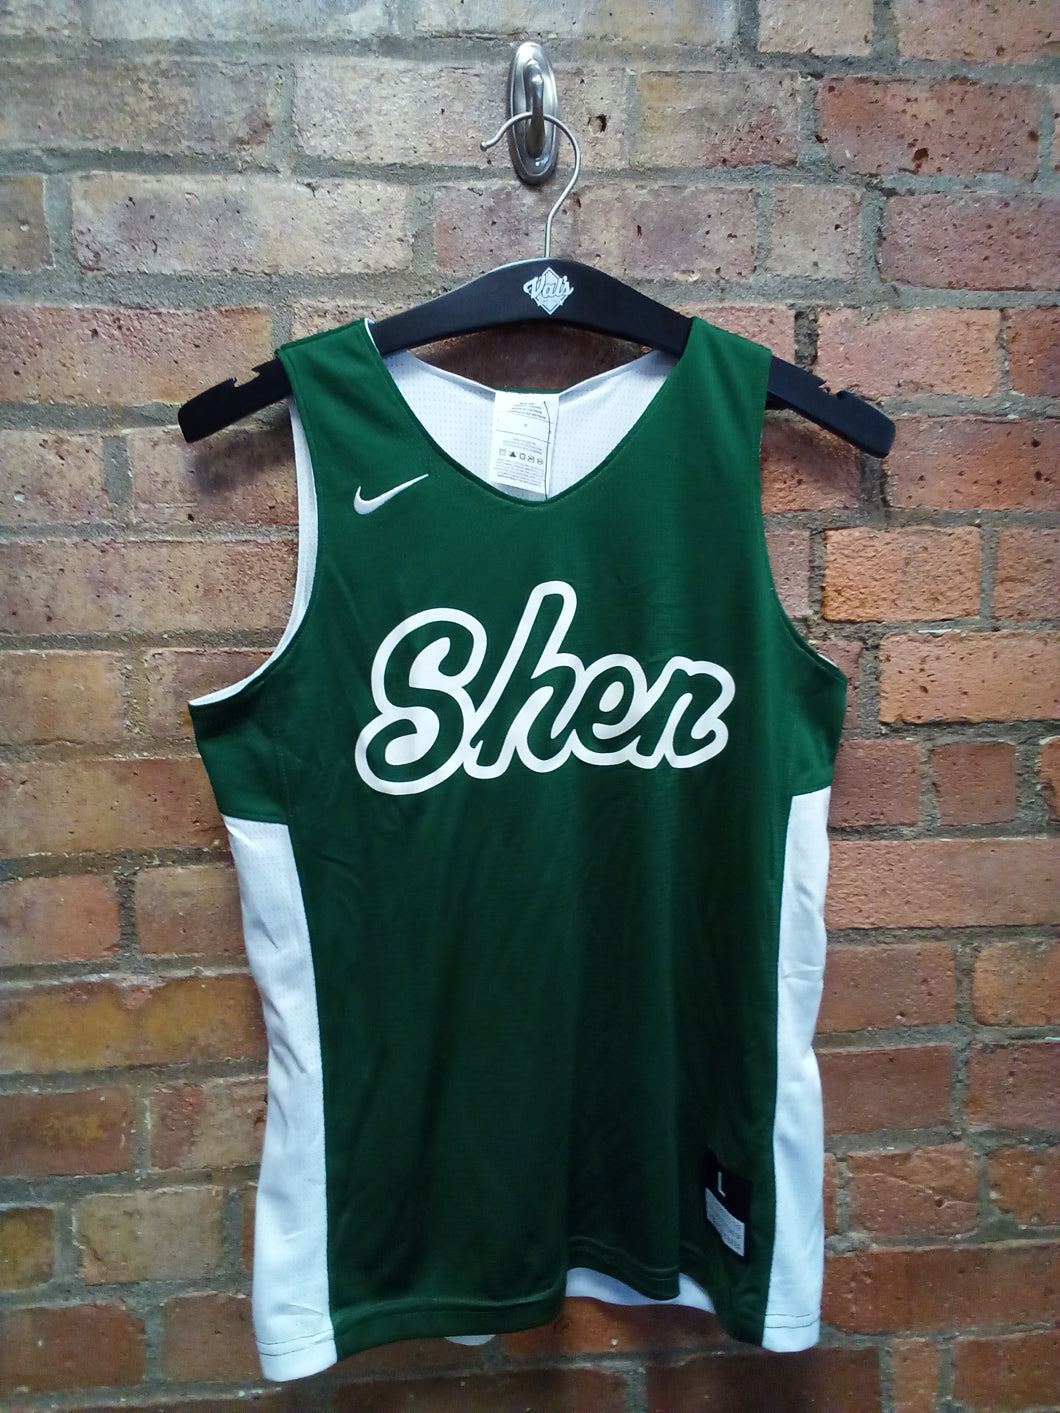 CLEARANCE - Shen Youth Nike Reversible Basketball Jersey - Size Large